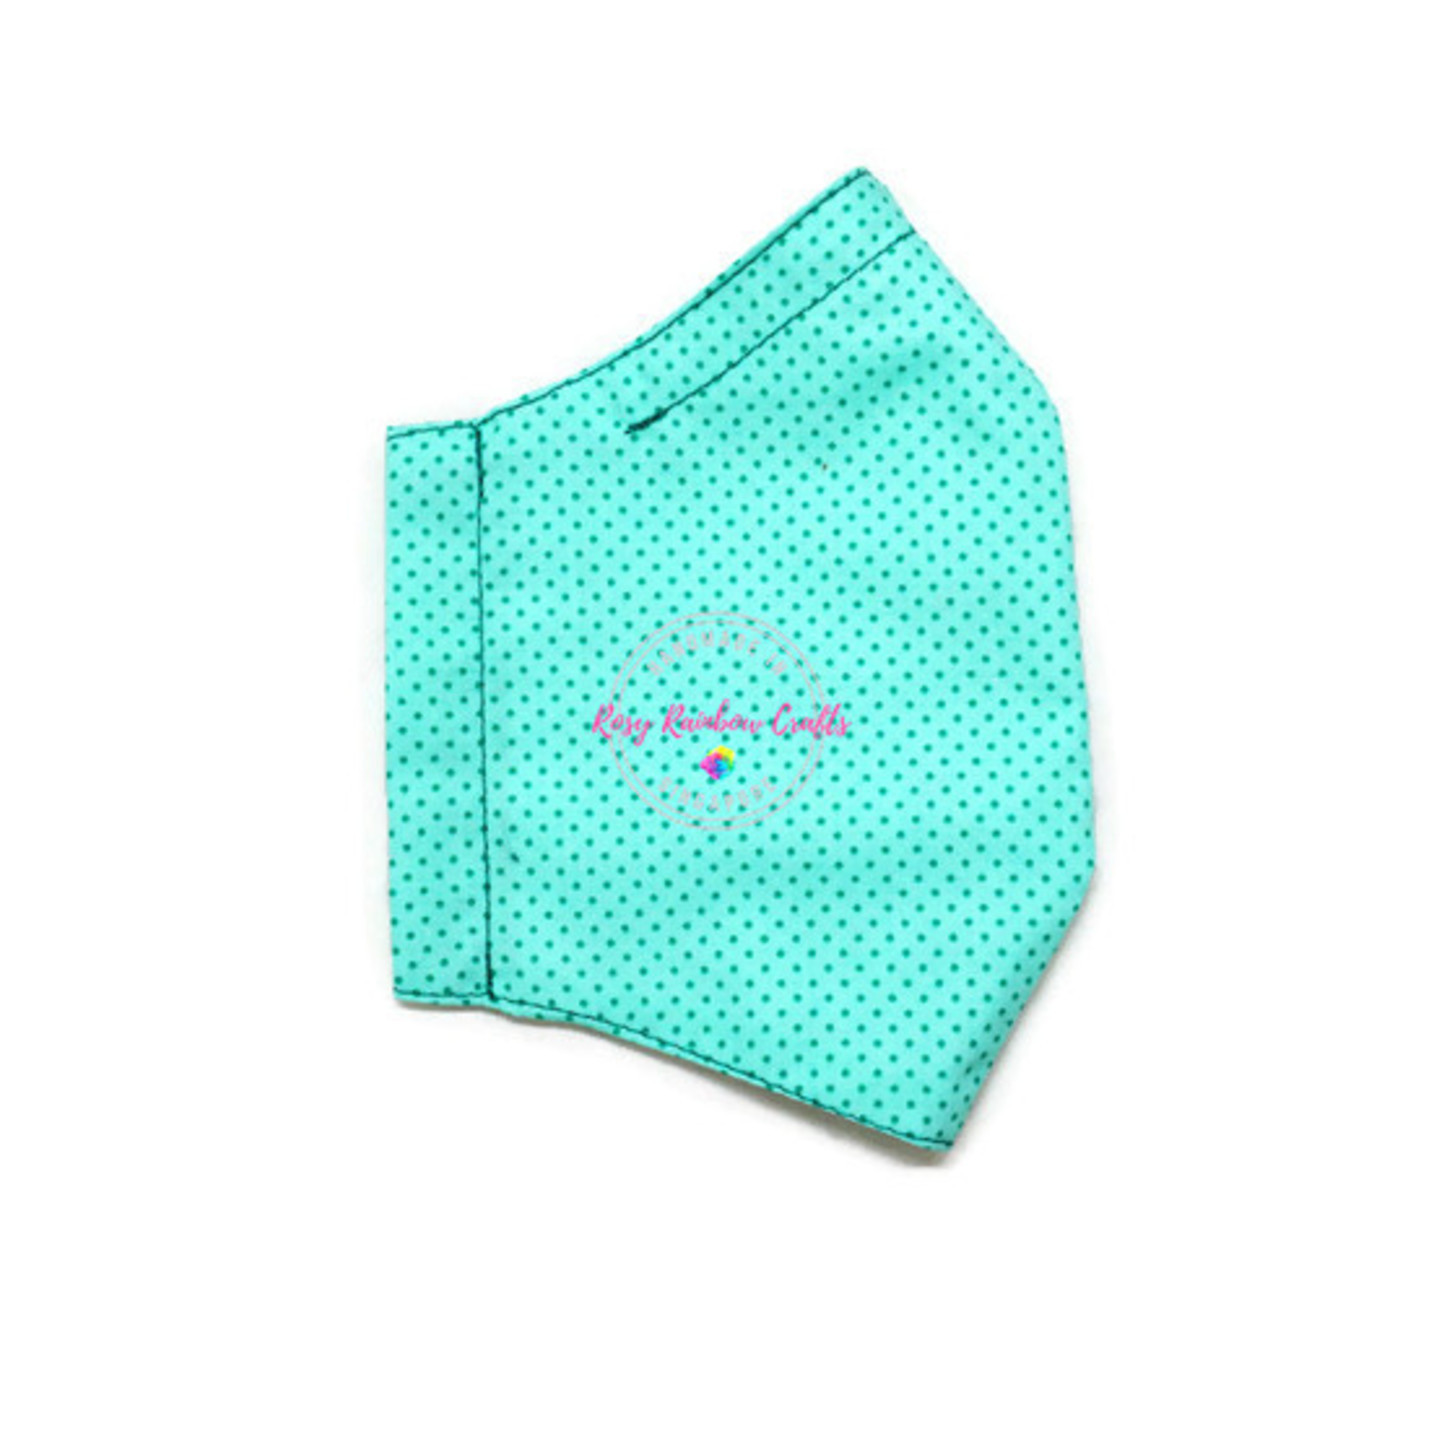 3D Seamless Mask Candy Turqouise Dots Medium (8-12 years old)